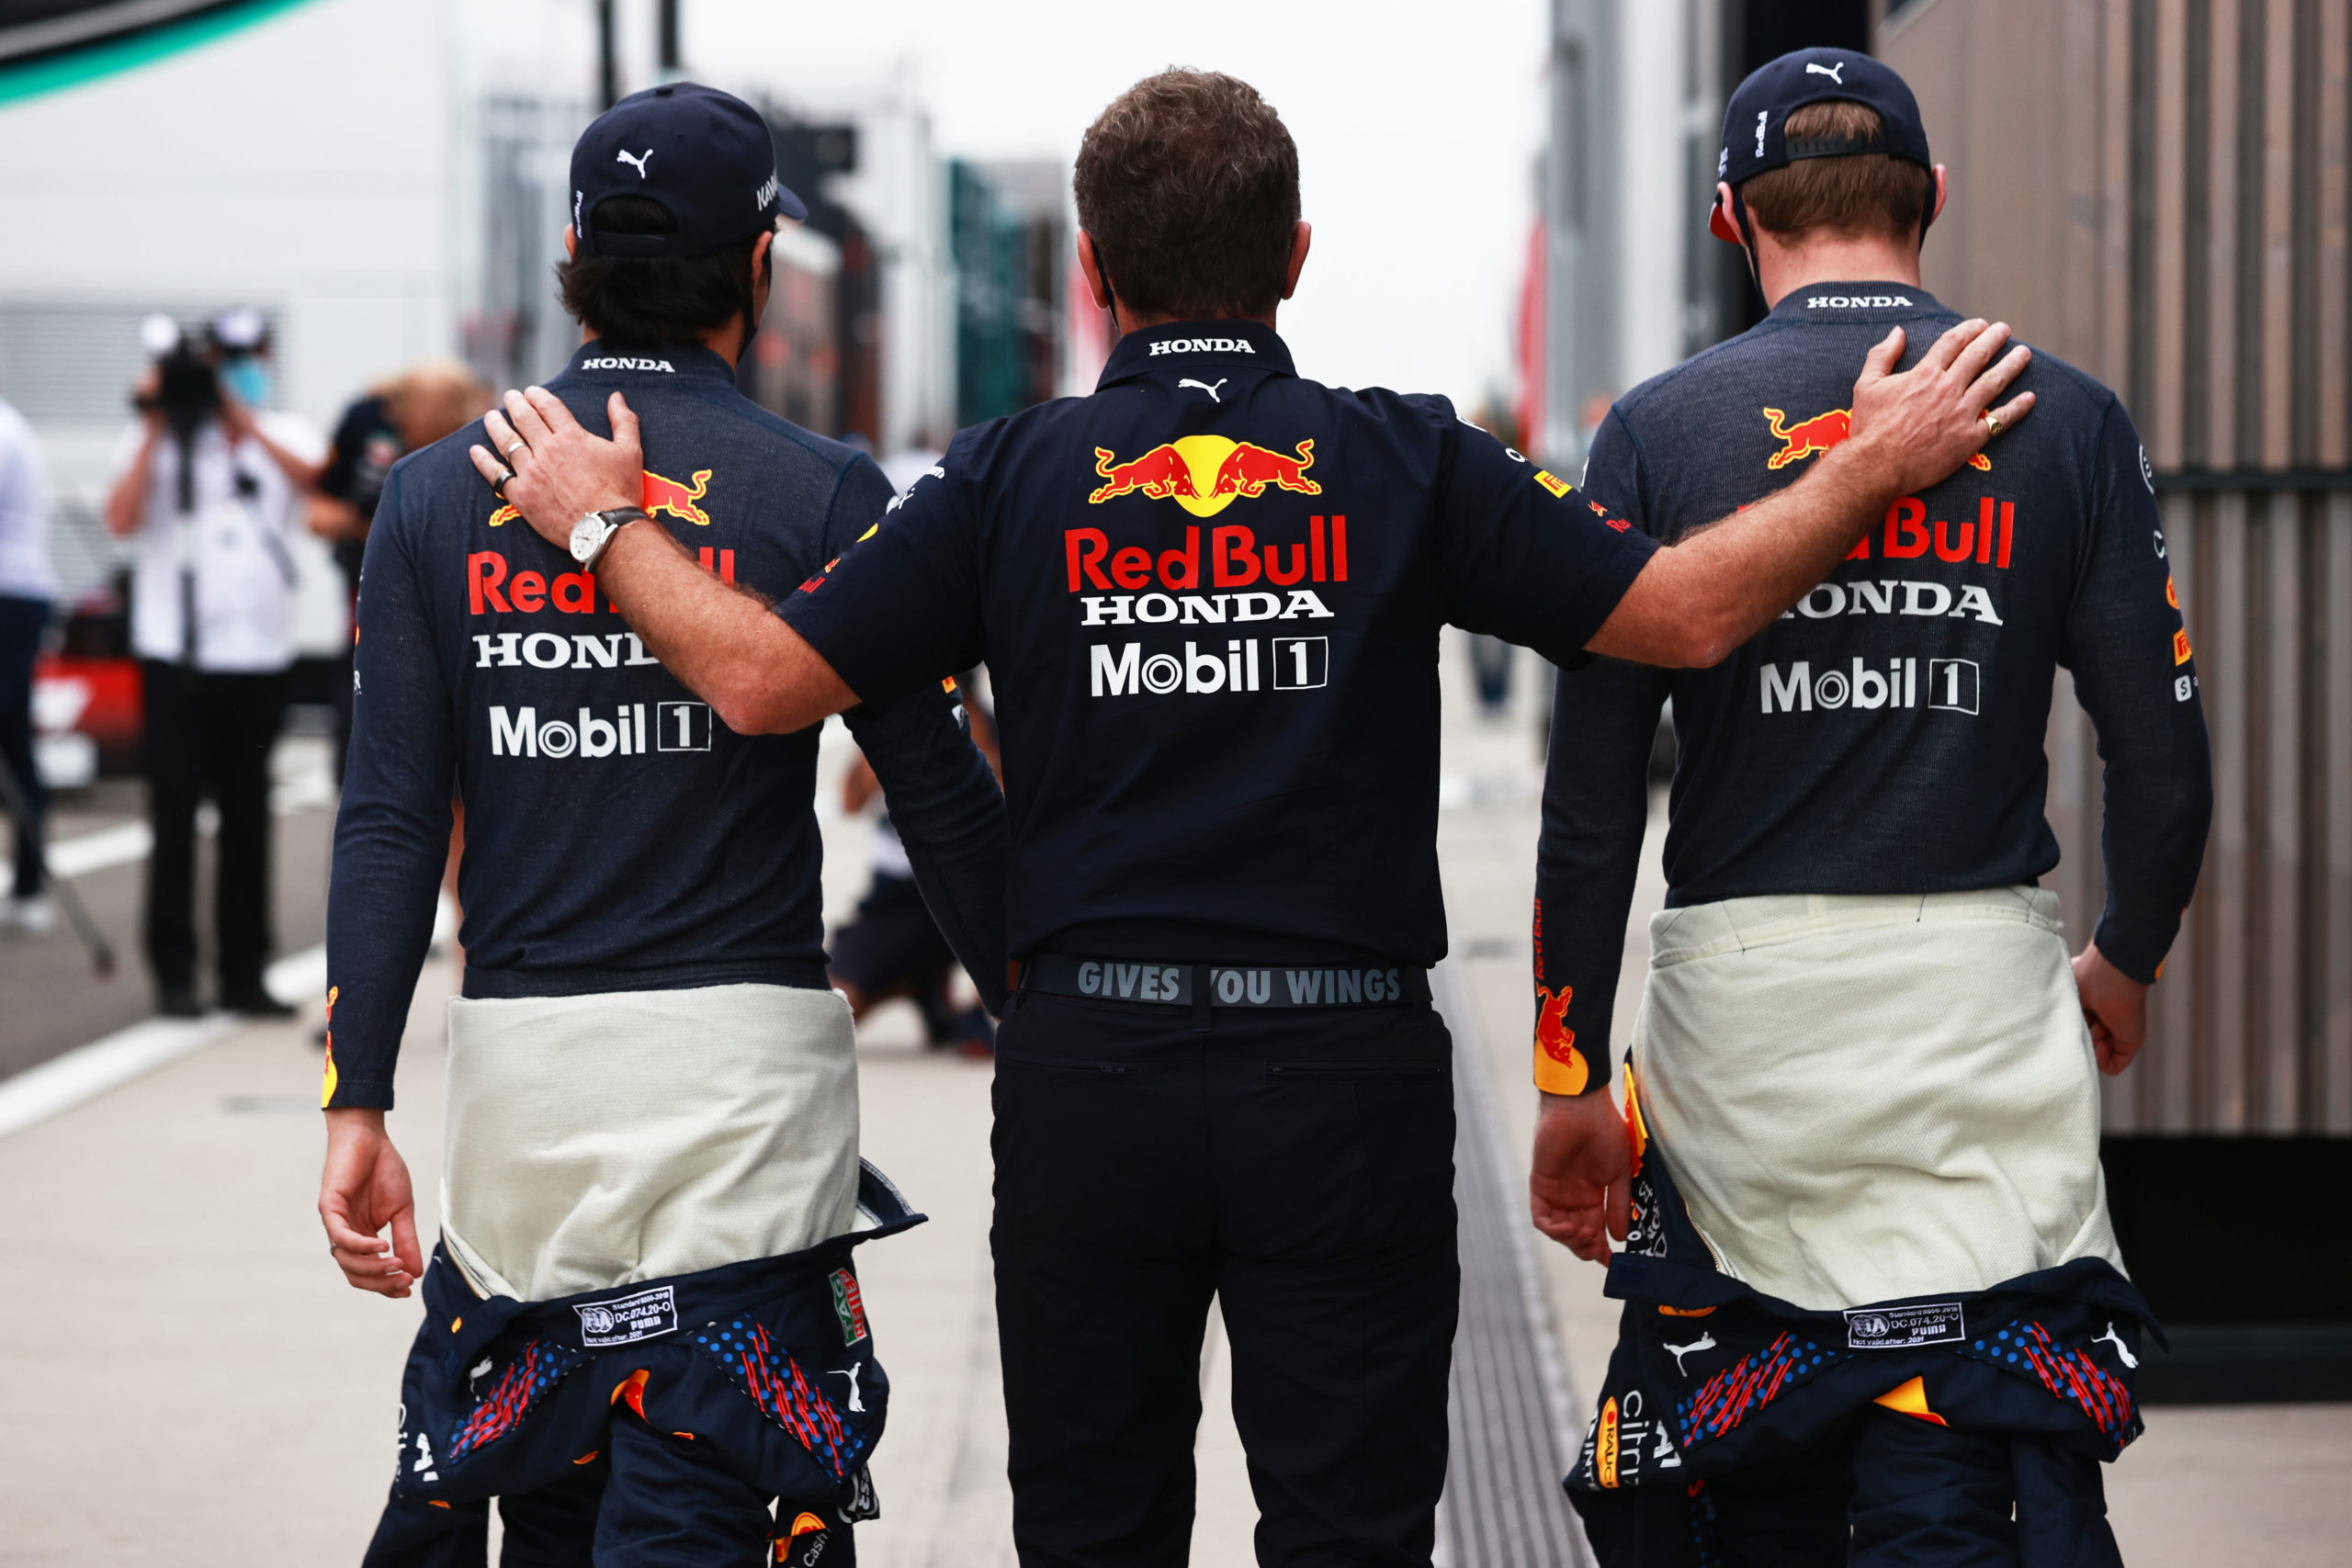 2021 Hungarian Grand Prix, Sunday – Sergio Perez, Christian Horner, and Max Verstappen (image courtesy Red Bull Racing)